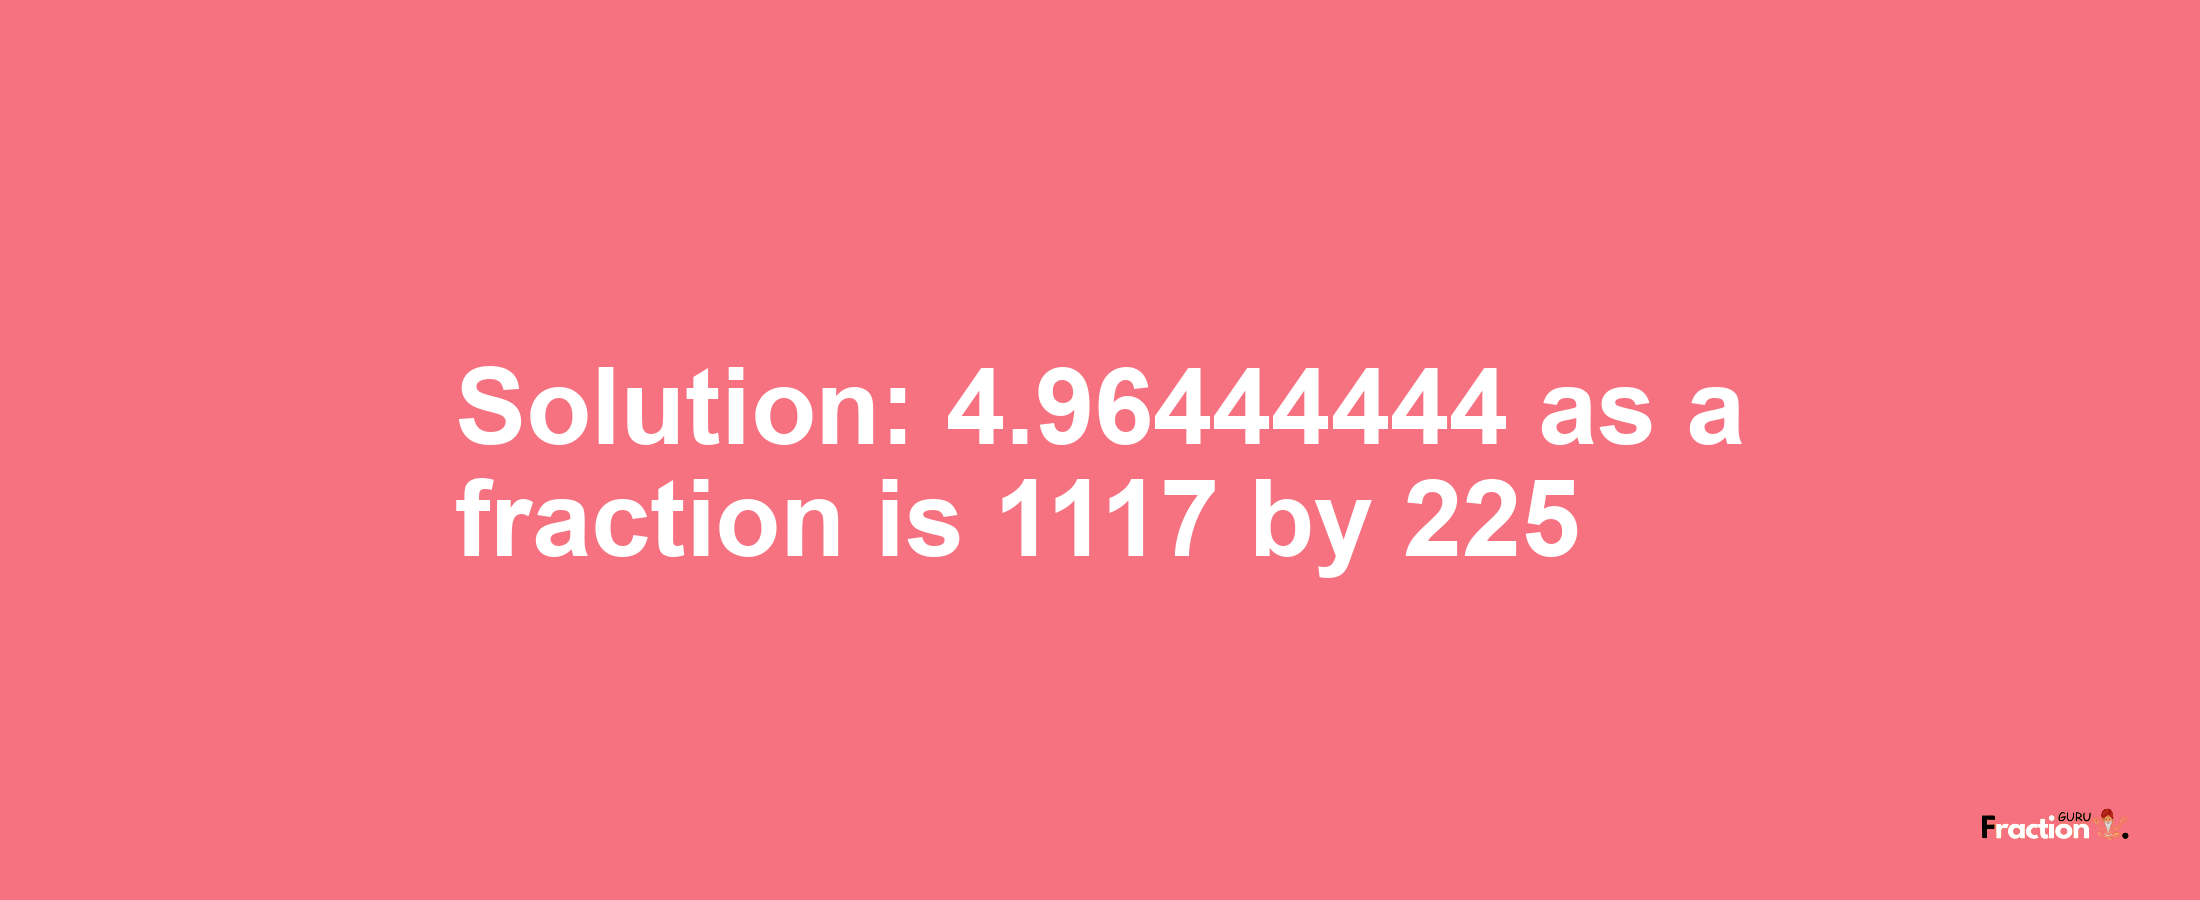 Solution:4.96444444 as a fraction is 1117/225